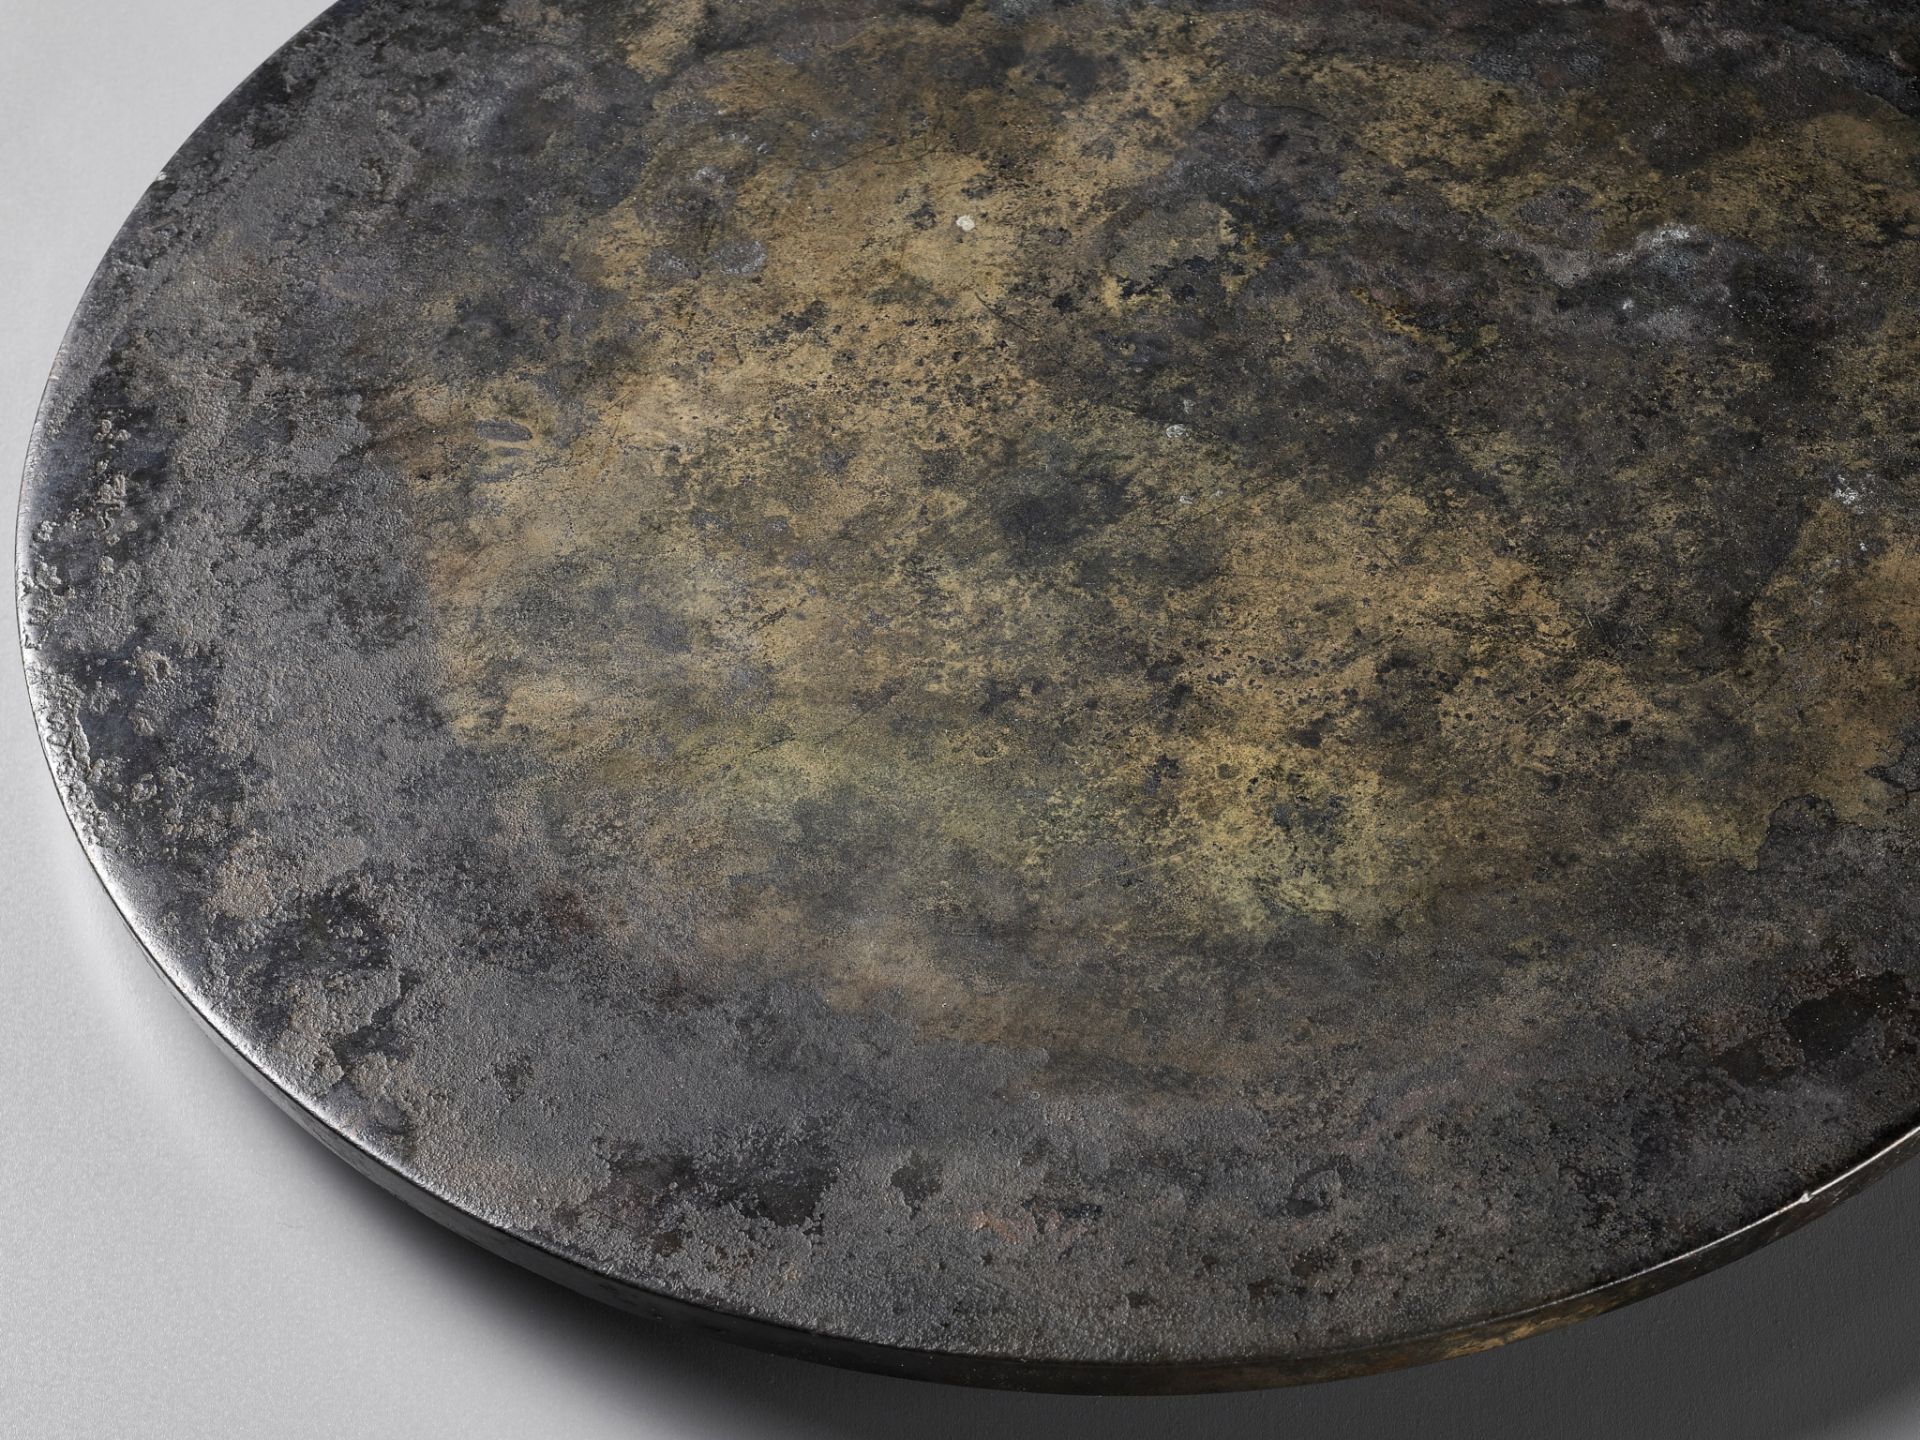 A LARGE BRONZE MIRROR WITH A 37-CHARACTER INSCRIPTION, HAN DYNASTY, CHINA, 206 BC-220 AD - Image 10 of 16